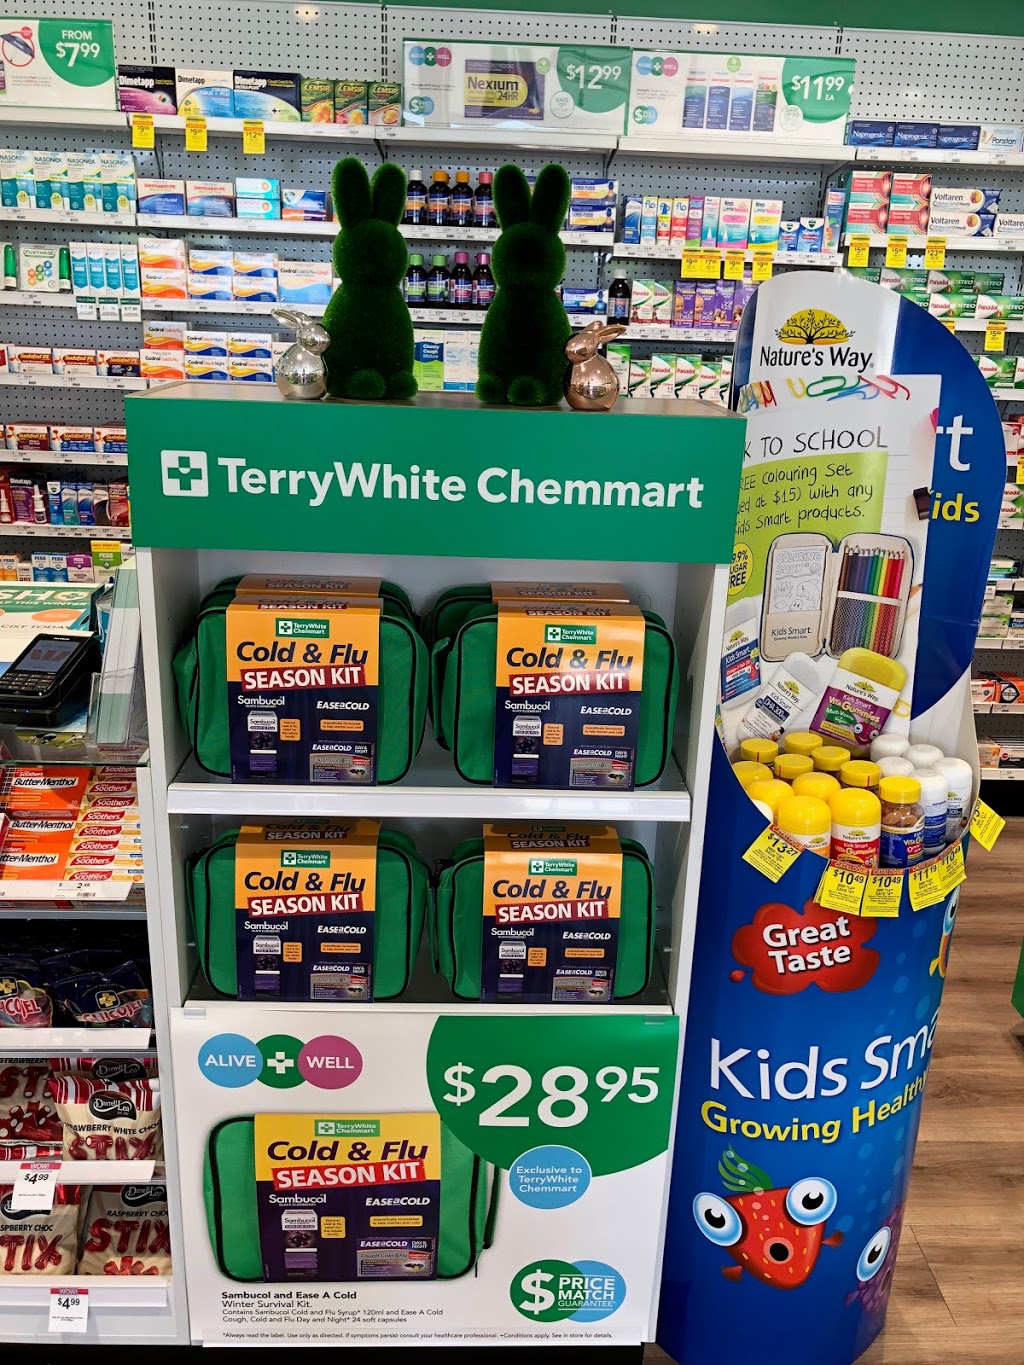 TerryWhite Chemmart Manly | Compounding Pharmacy | pharmacy | 10 Manly Rd, Manly QLD 4179, Australia | 0733966496 OR +61 7 3396 6496